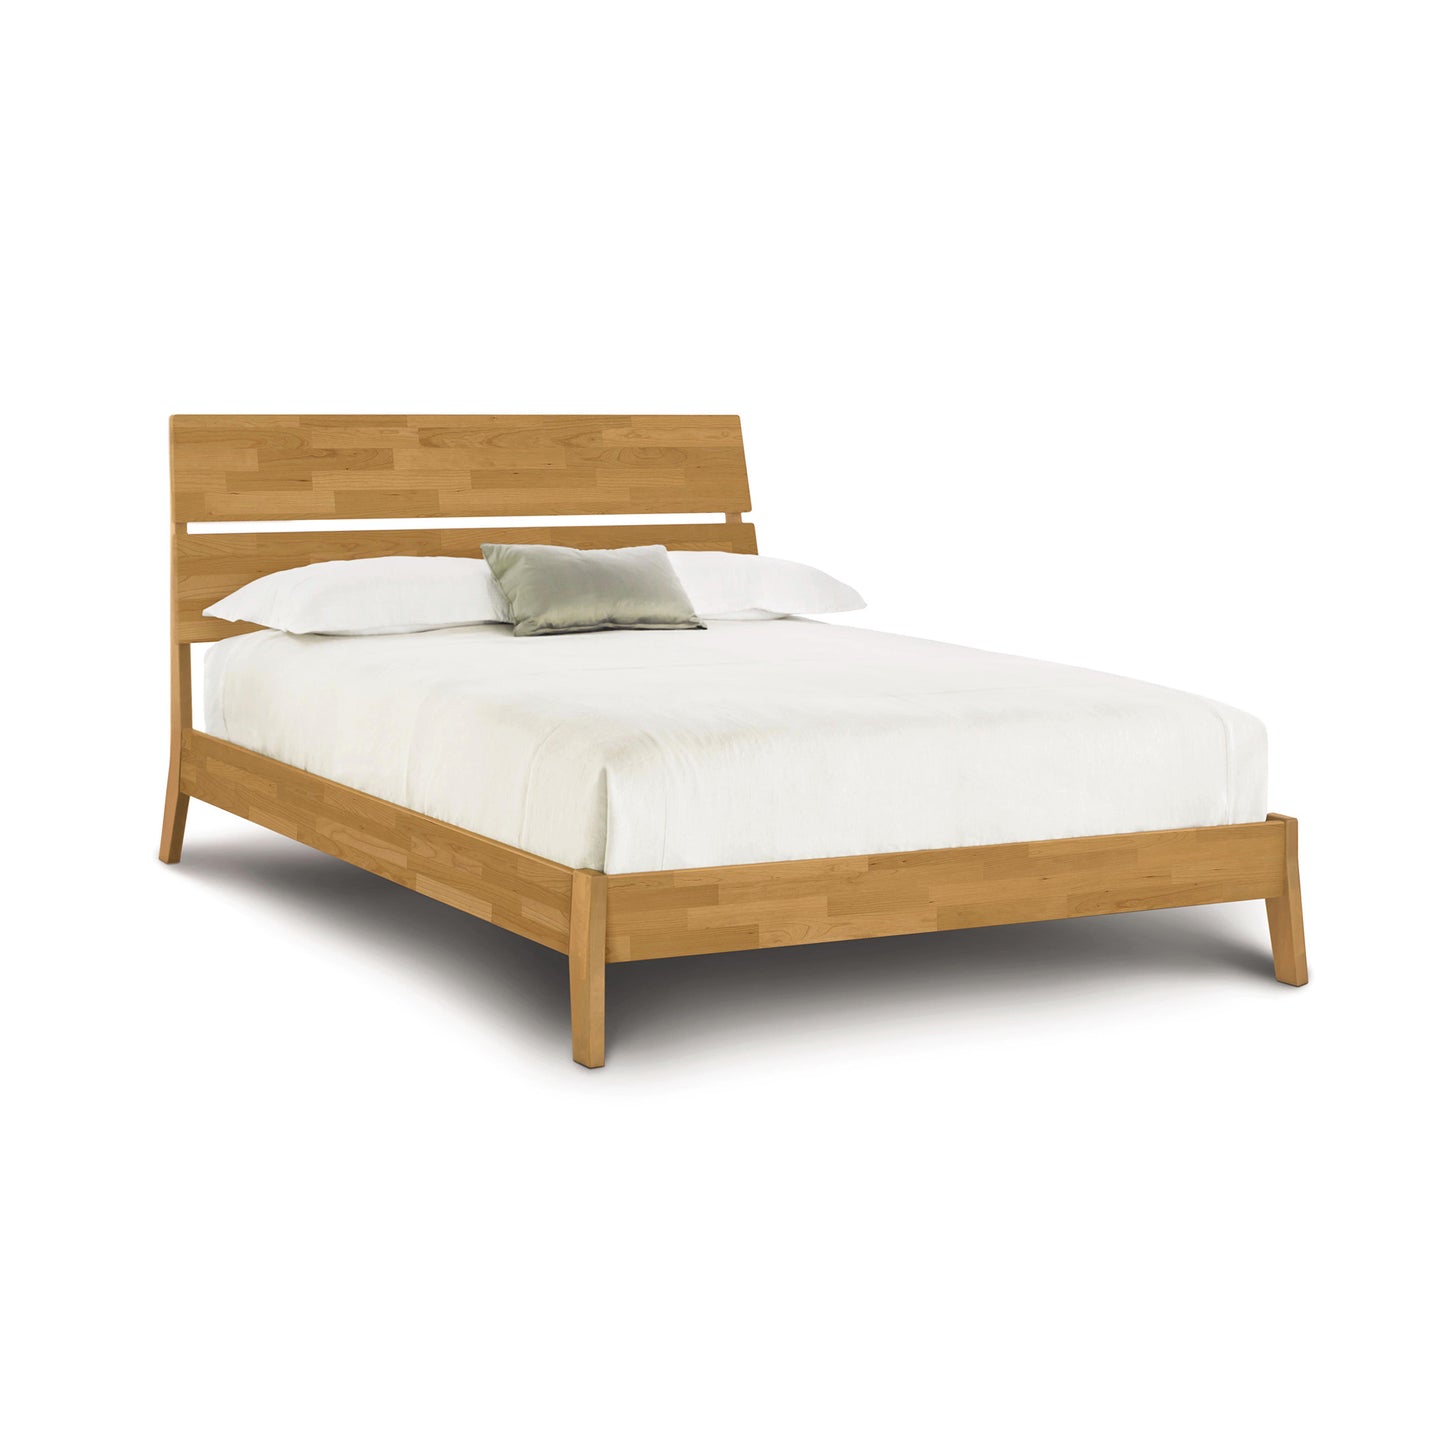 A modern Copeland Furniture Linn Cherry Platform Bed frame, crafted from upcycled sustainably sourced cherry hardwood, with a white bedsheet and a single green pillow against a white background.